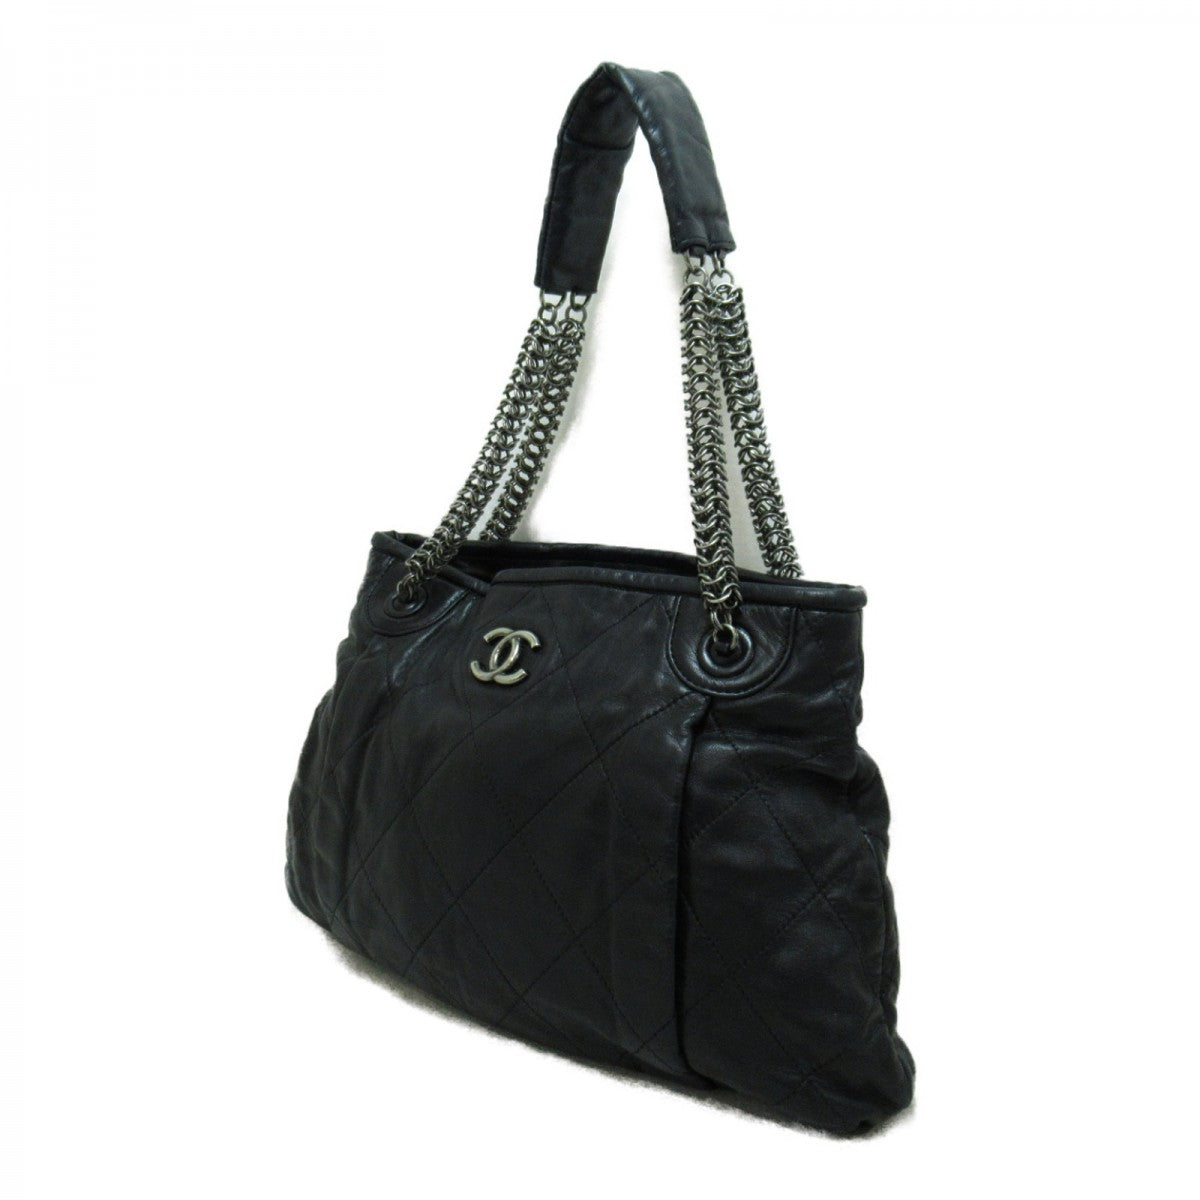 Quilted Leather Chain Shoulder Bag